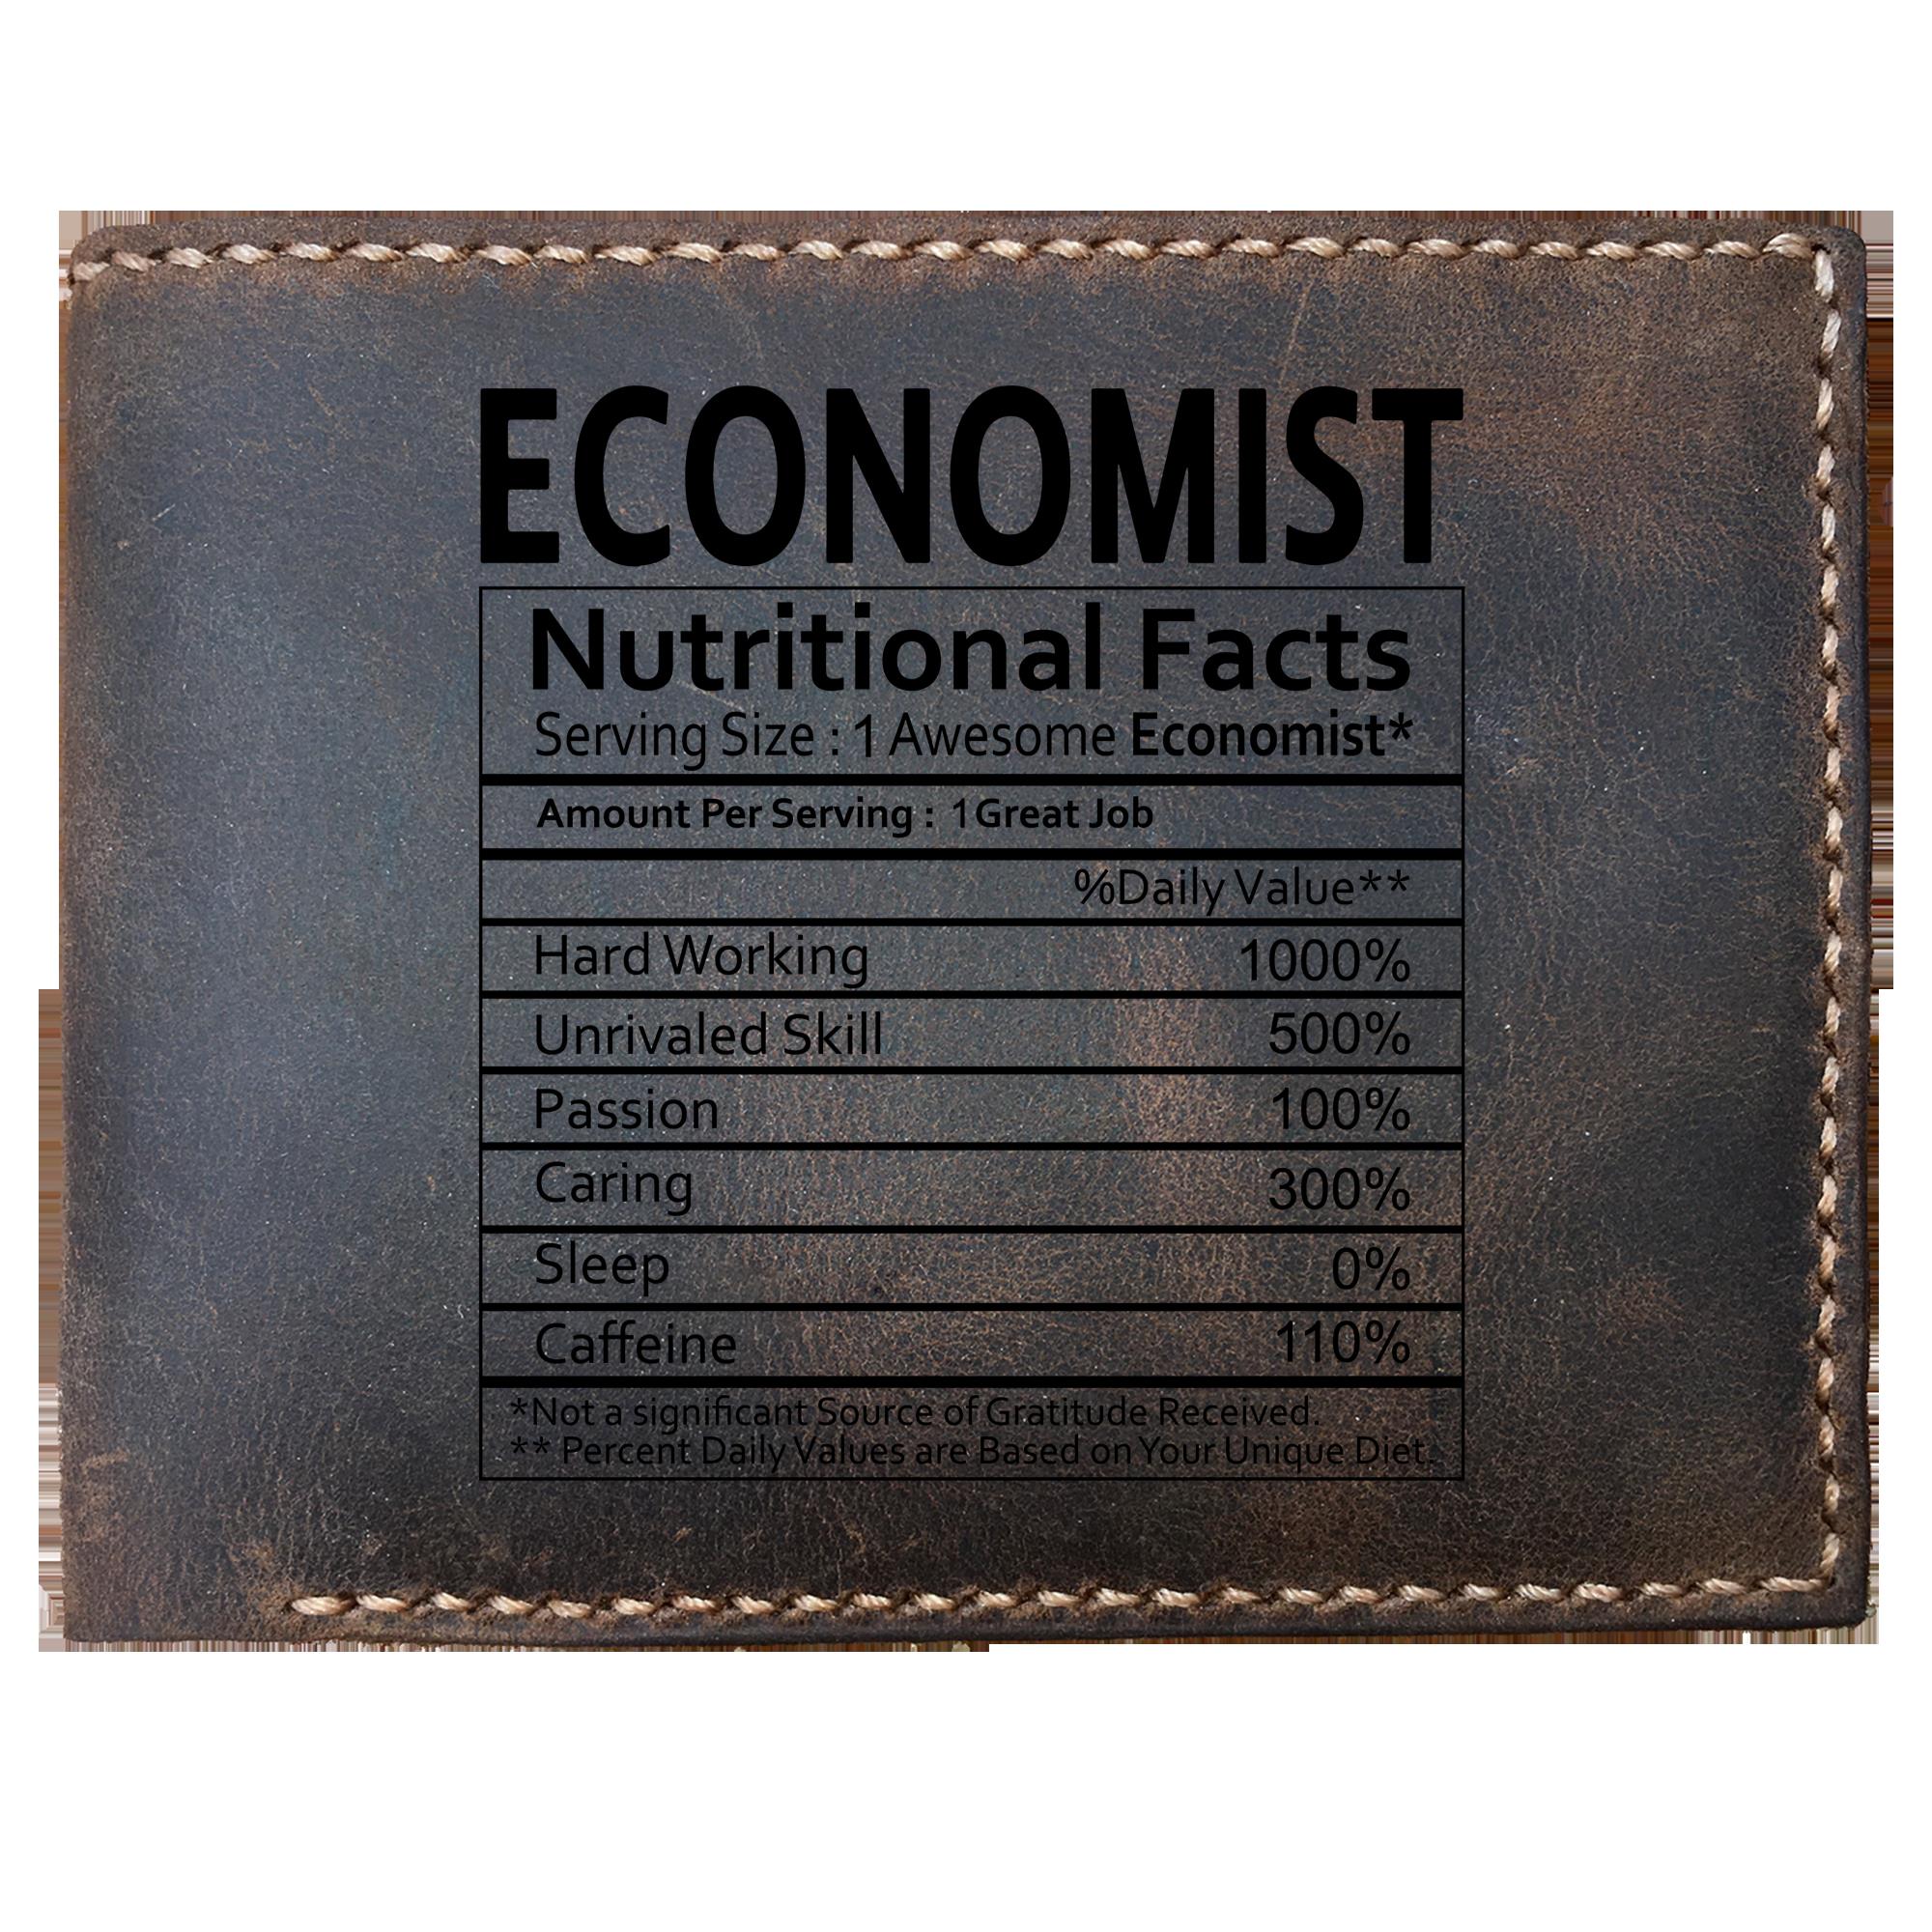 Skitongifts Funny Custom Laser Engraved Bifold Leather Wallet For Men, Economist Nutritional Facts